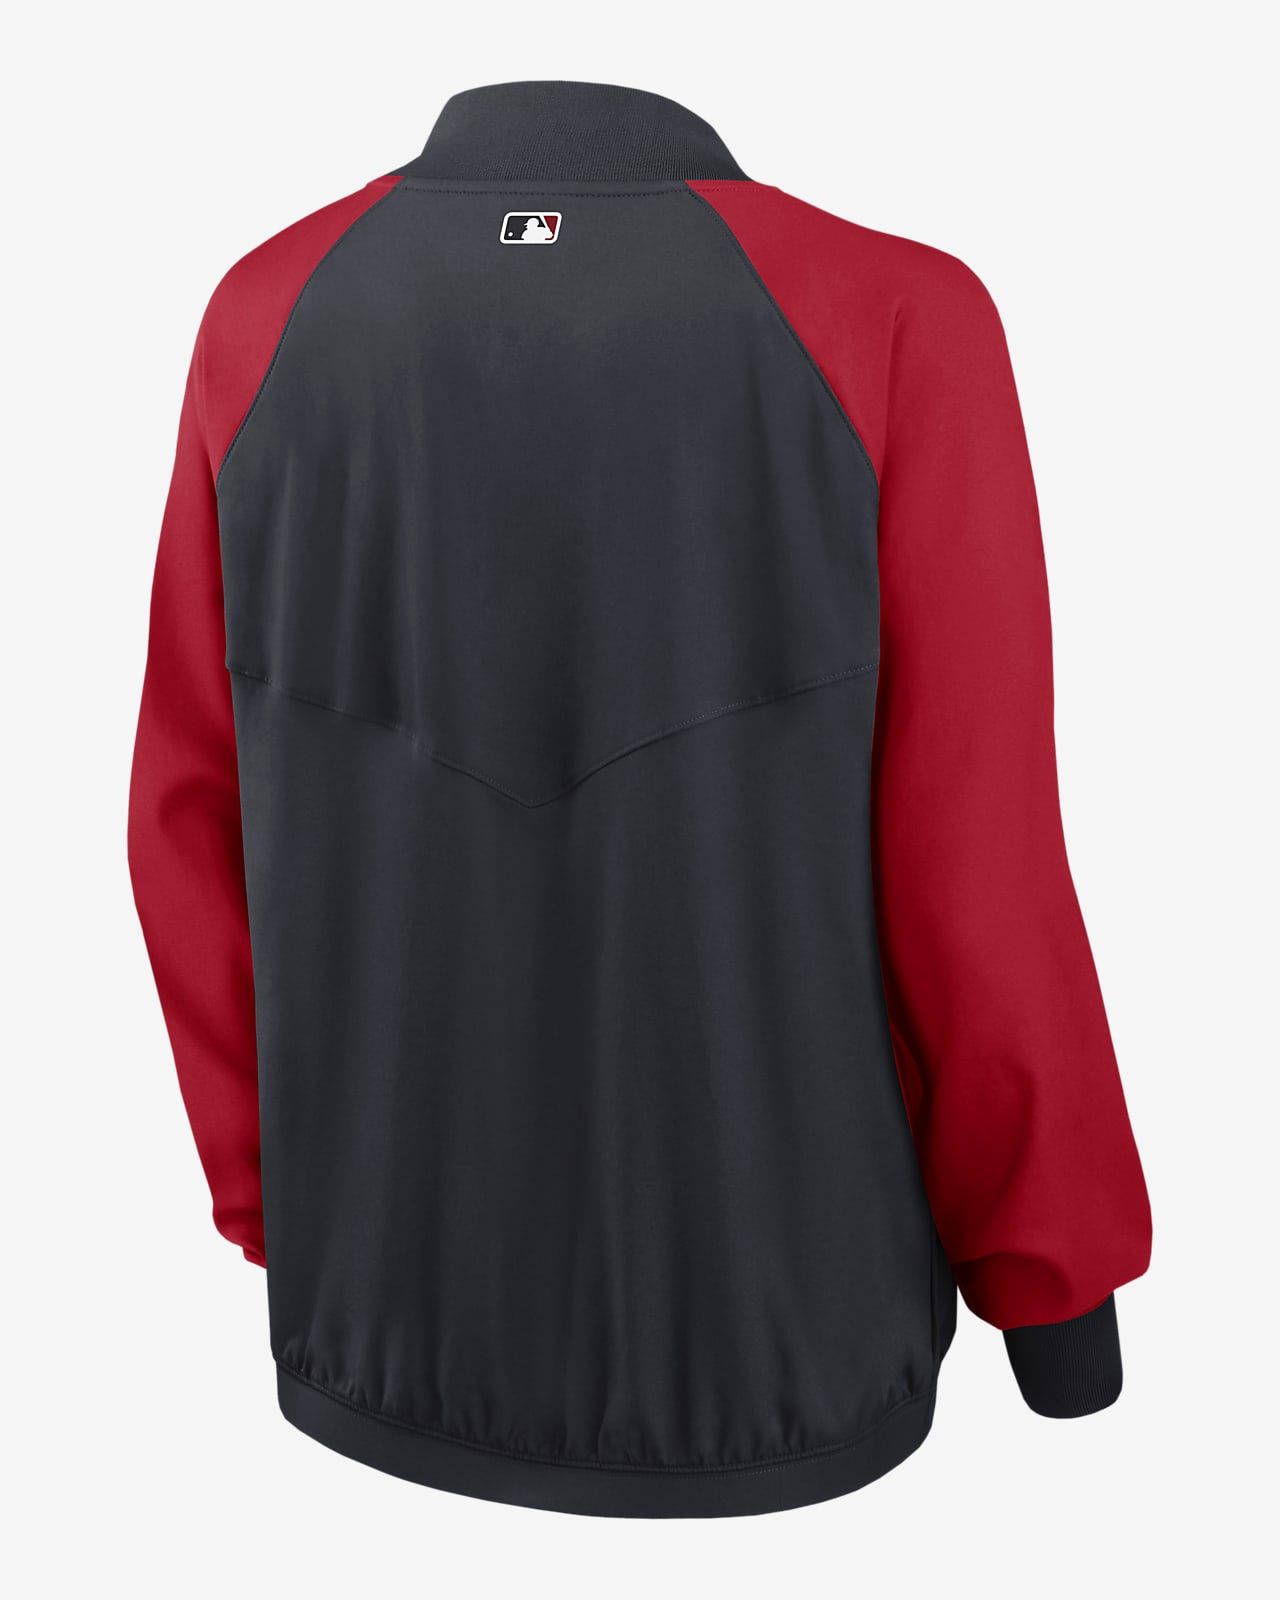 Nike Dri-FIT Game (MLB Cleveland Guardians) Men's Long-Sleeve T